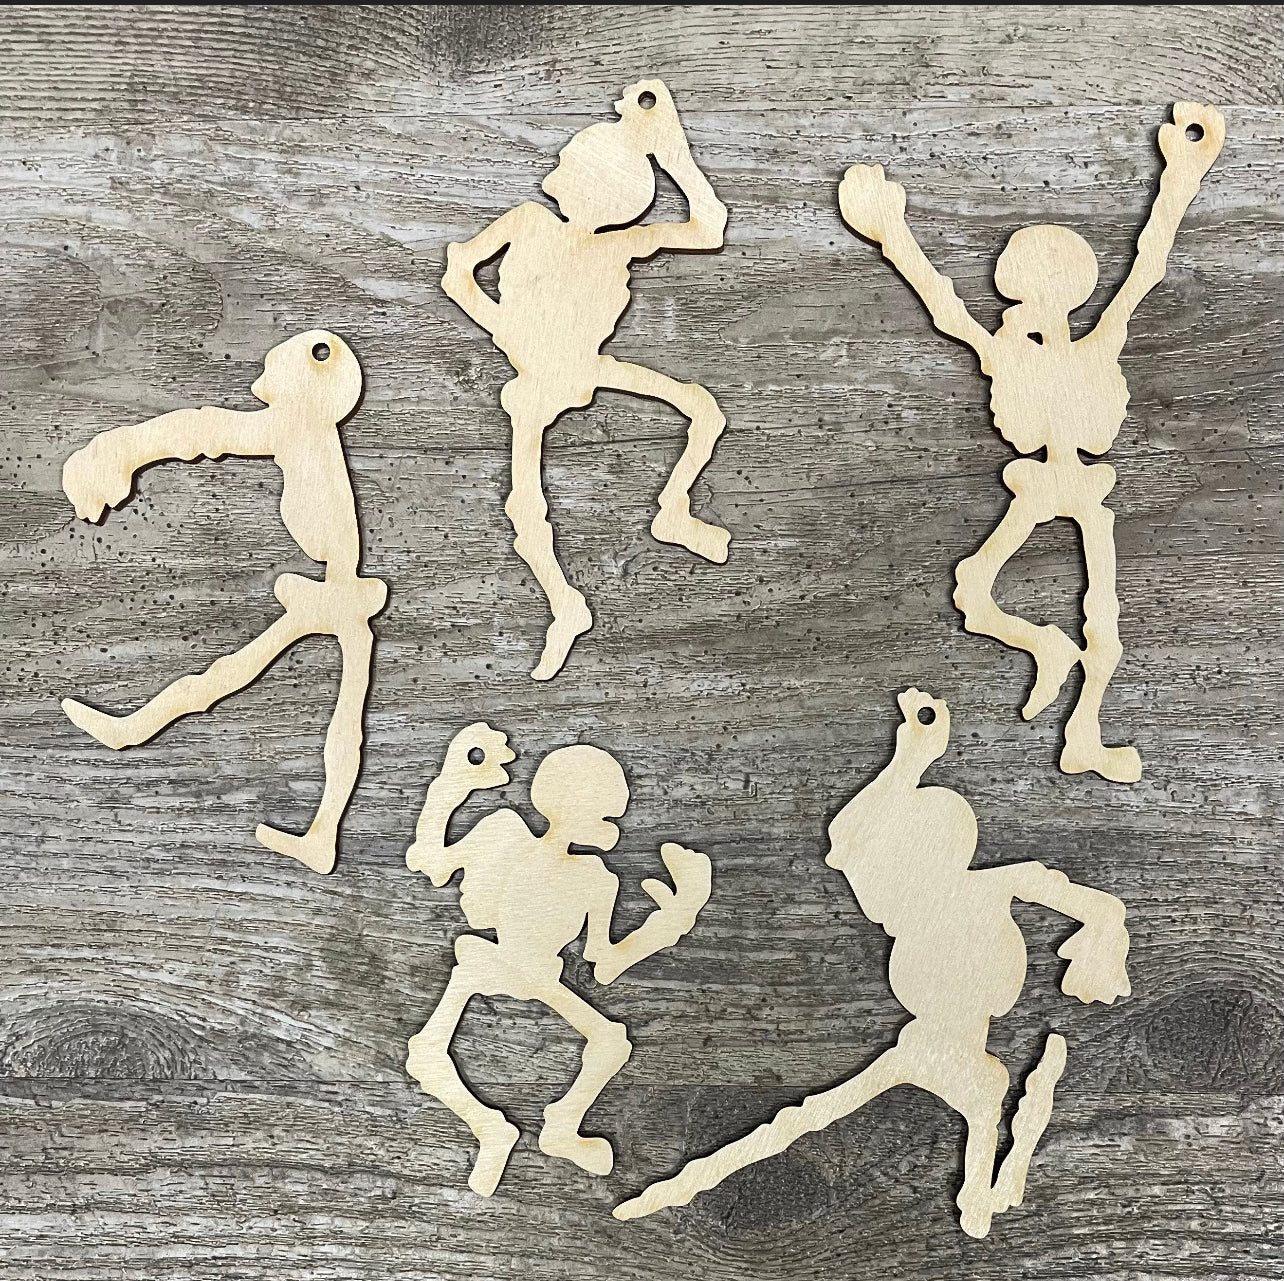 Halloween Ornaments Skeleton pieces wooden cutouts ready for you to paint